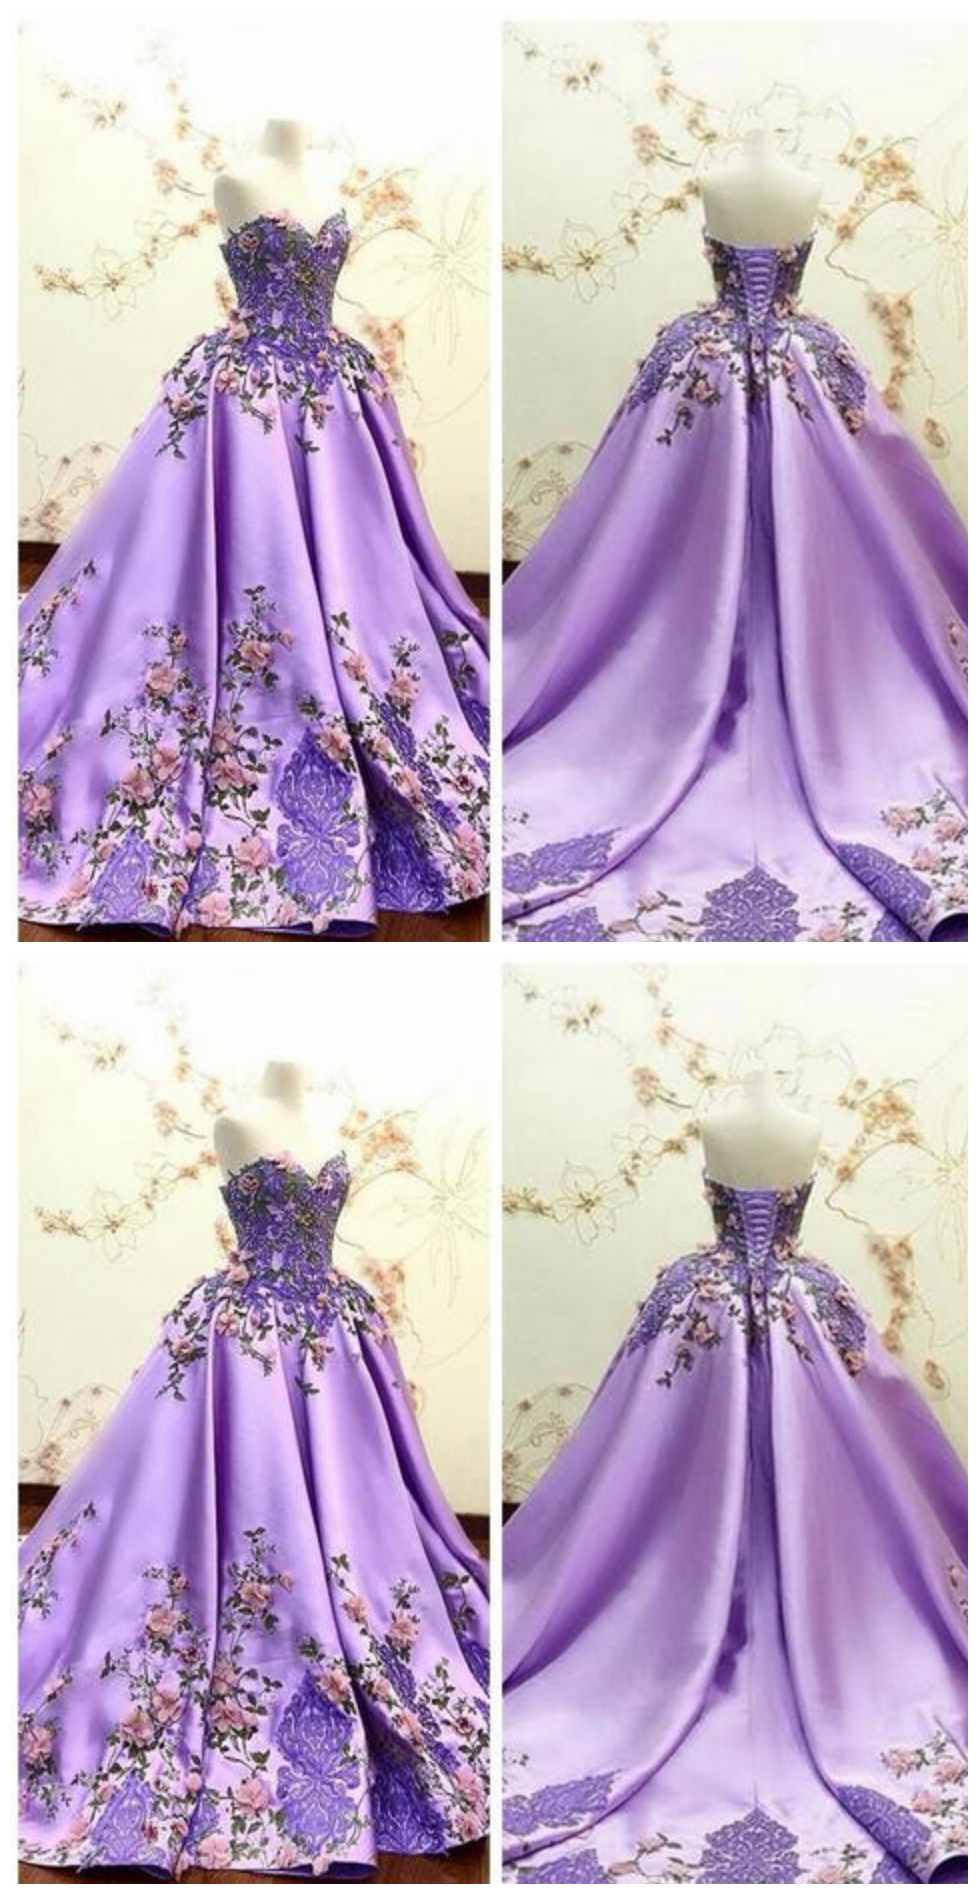 Beautiful Sweetheart 3d Flowers Adorned Prom Dresses Embroidery Satin Lace Appliques Bandage Formal Special Occasion Evening Party Gowns